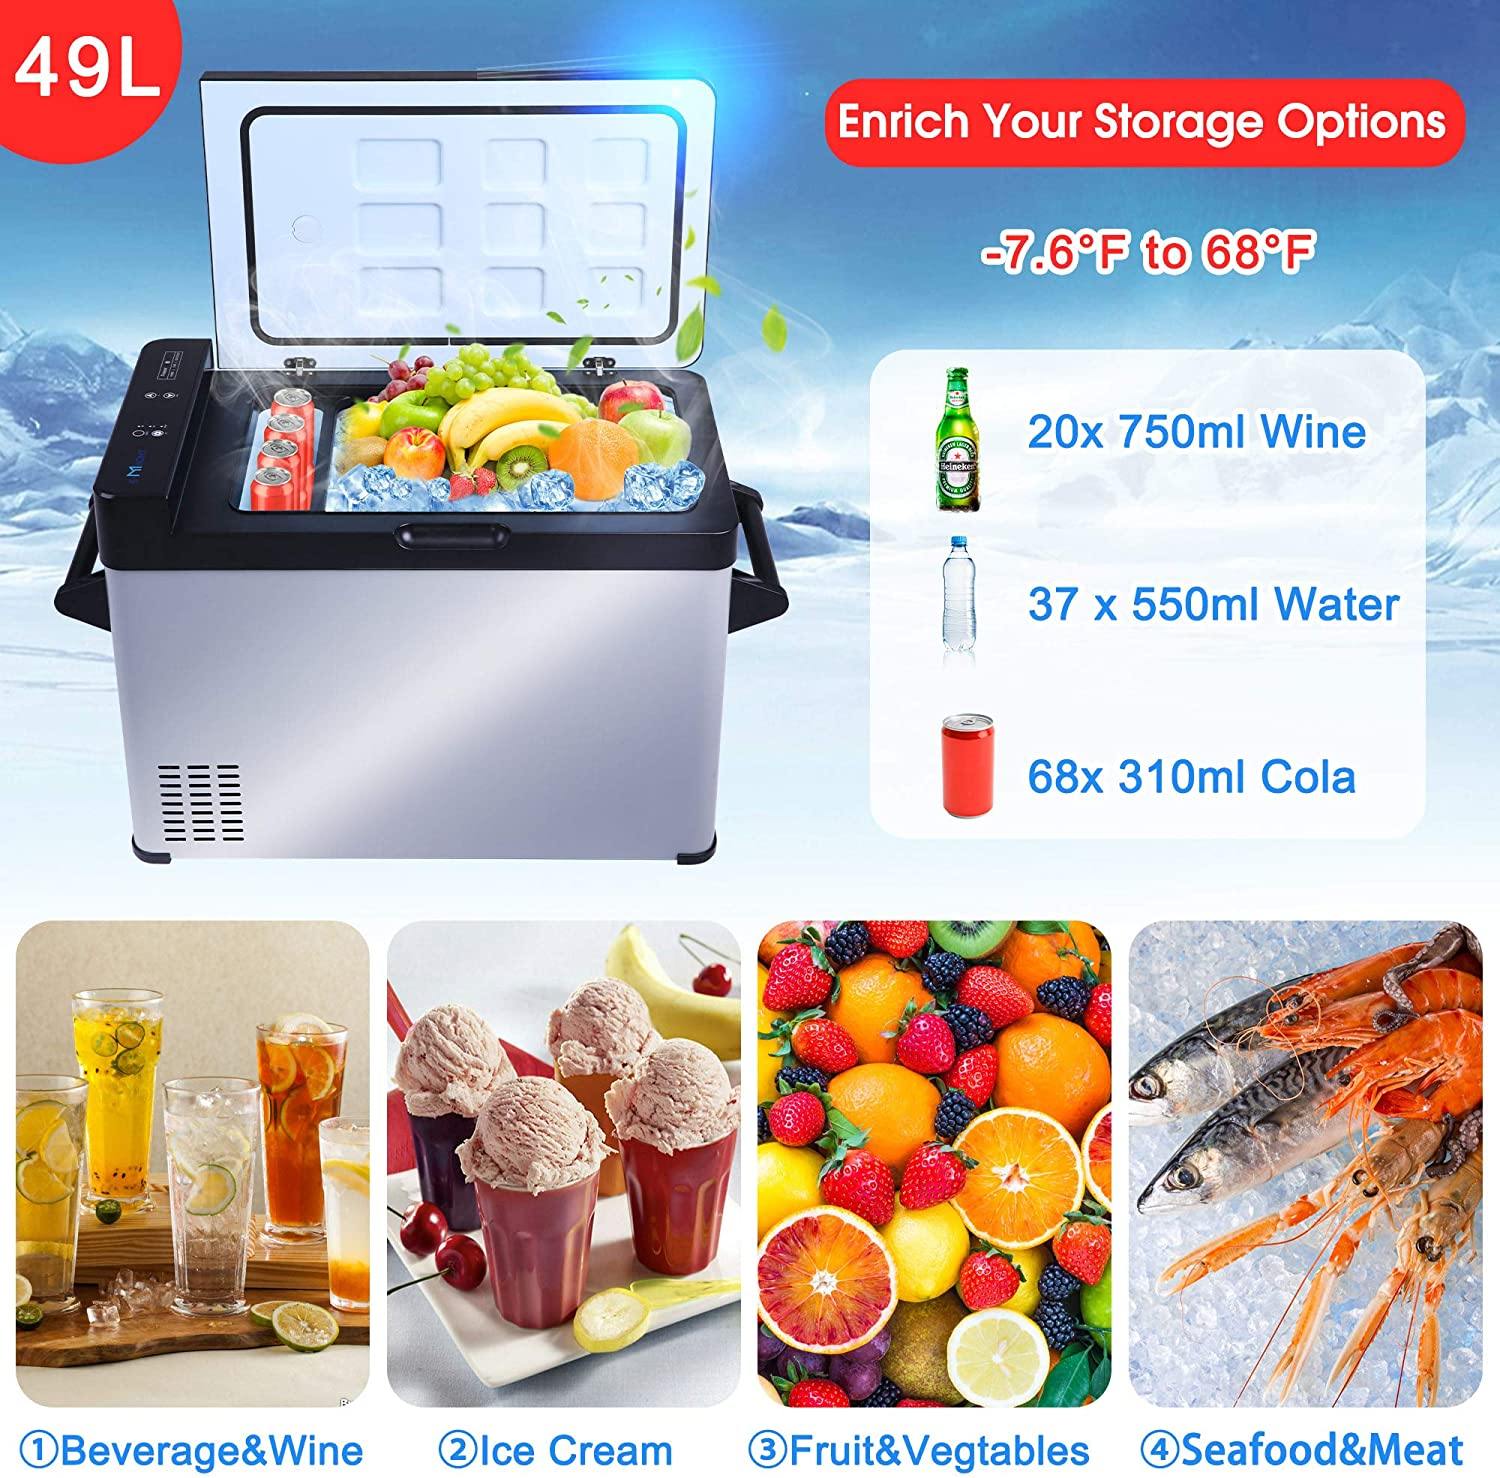 Mini Refriger for Car, DC12/24V, -7.6°F to 68°F, Car Refrigerator, Mini Freezer for Driving, Travel, Fishing, Outdoor or Home Use 52qt - Bosonshop